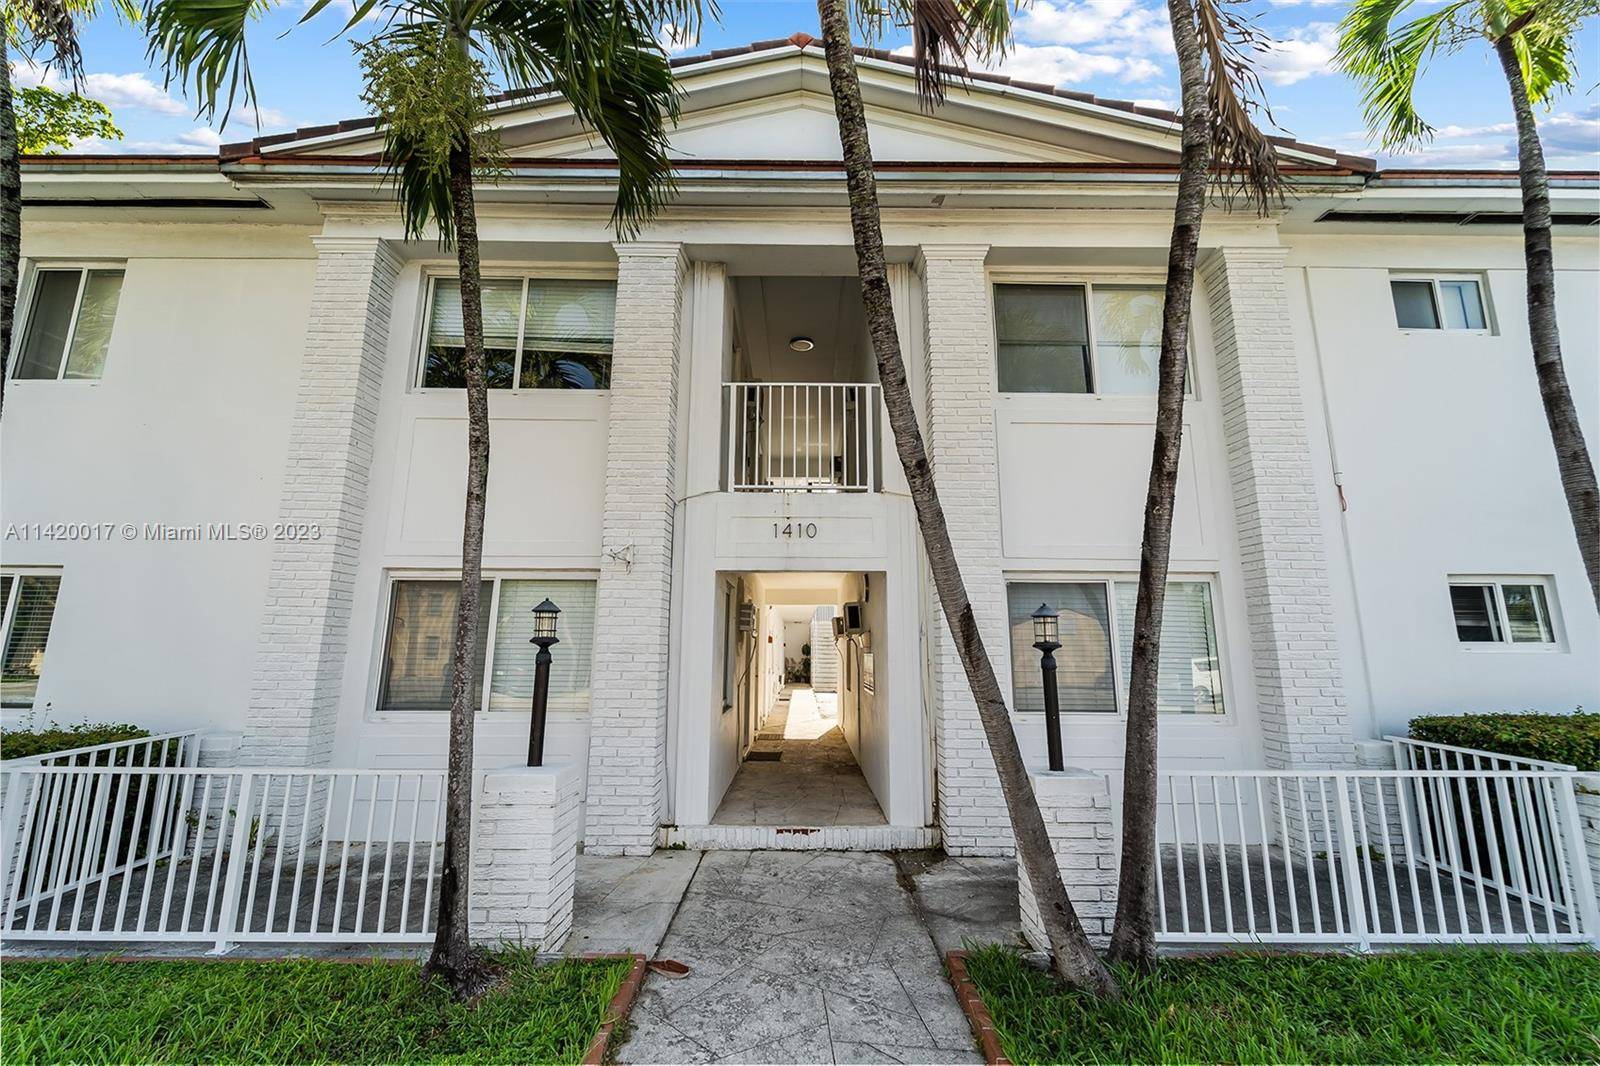 Incredible investment opportunity in high barrier to entry Coral Gables submarket.